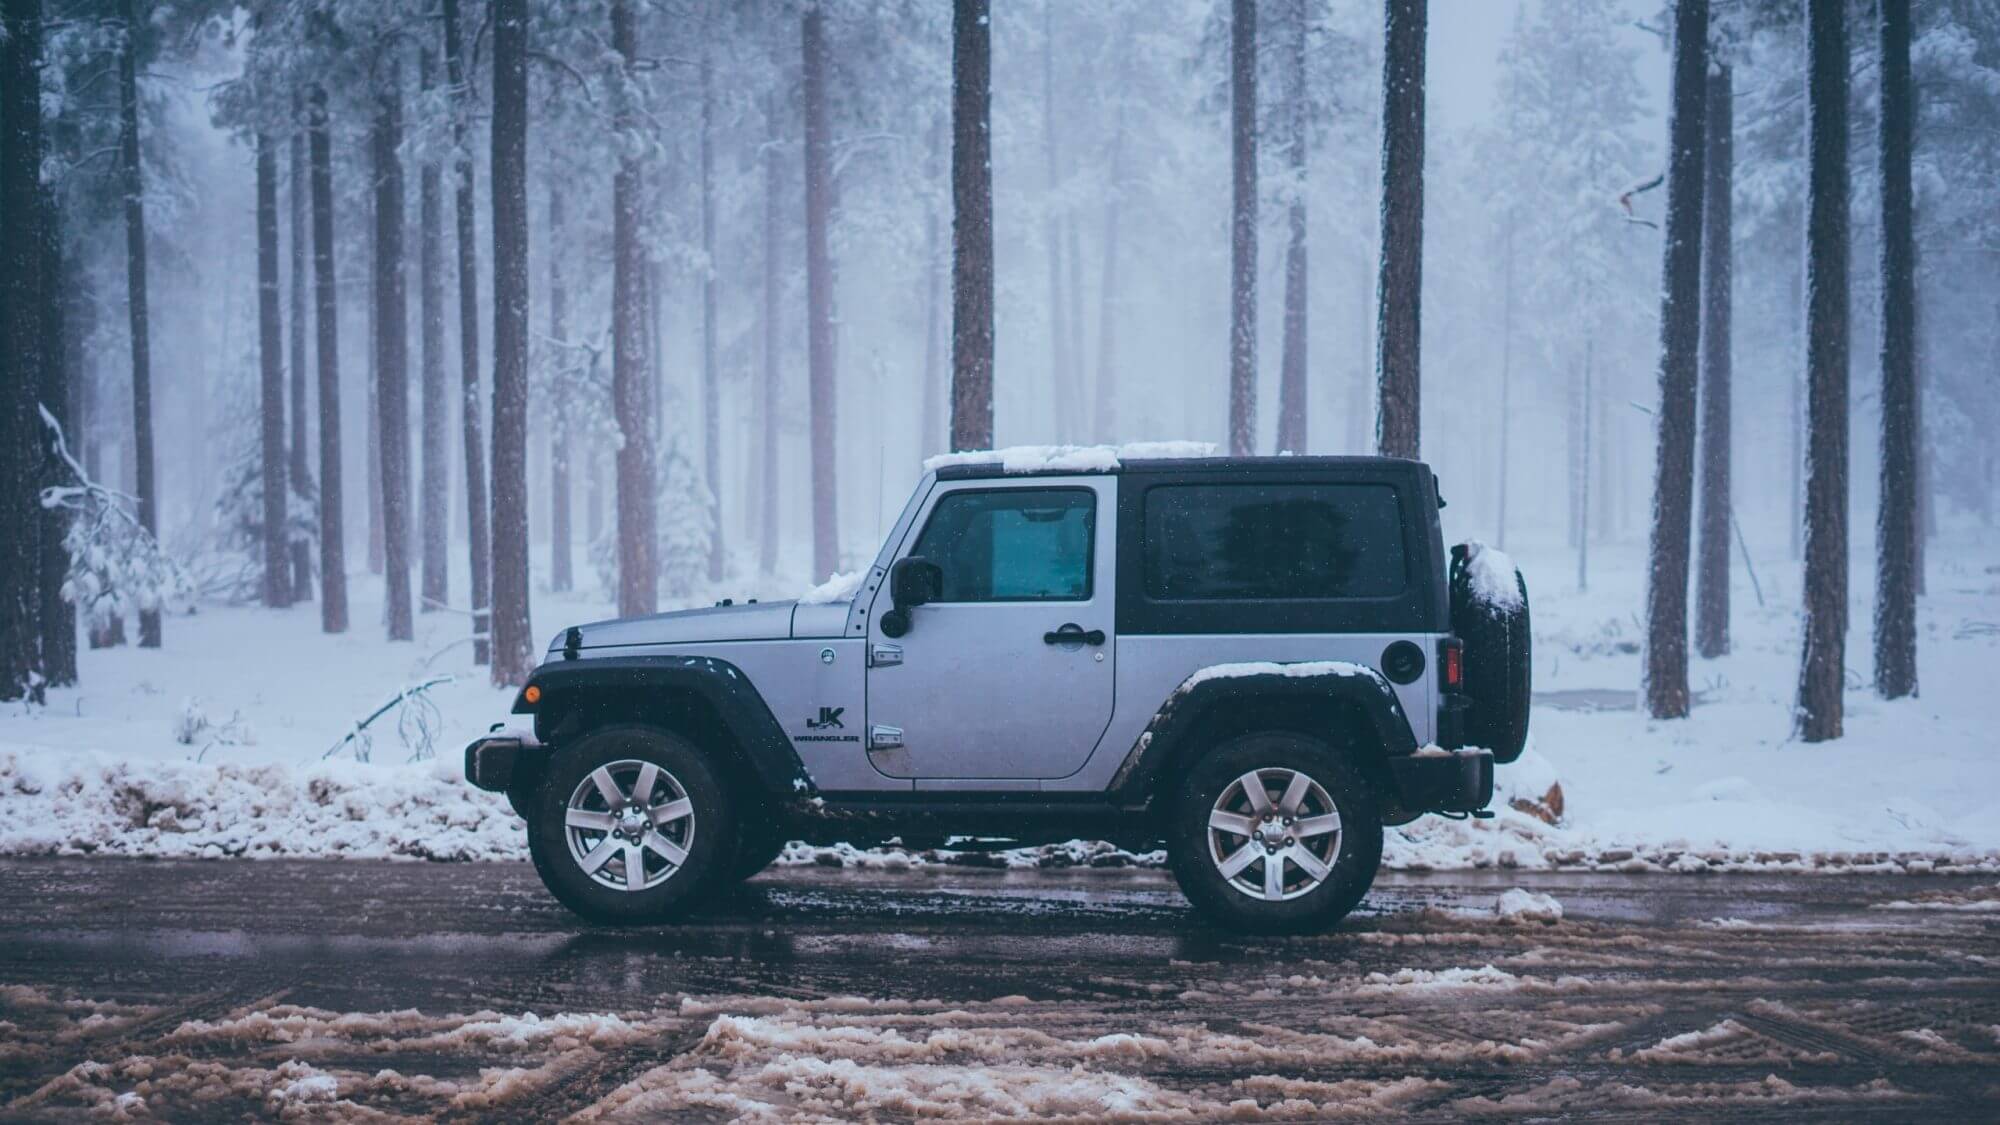 Jeep in the snow